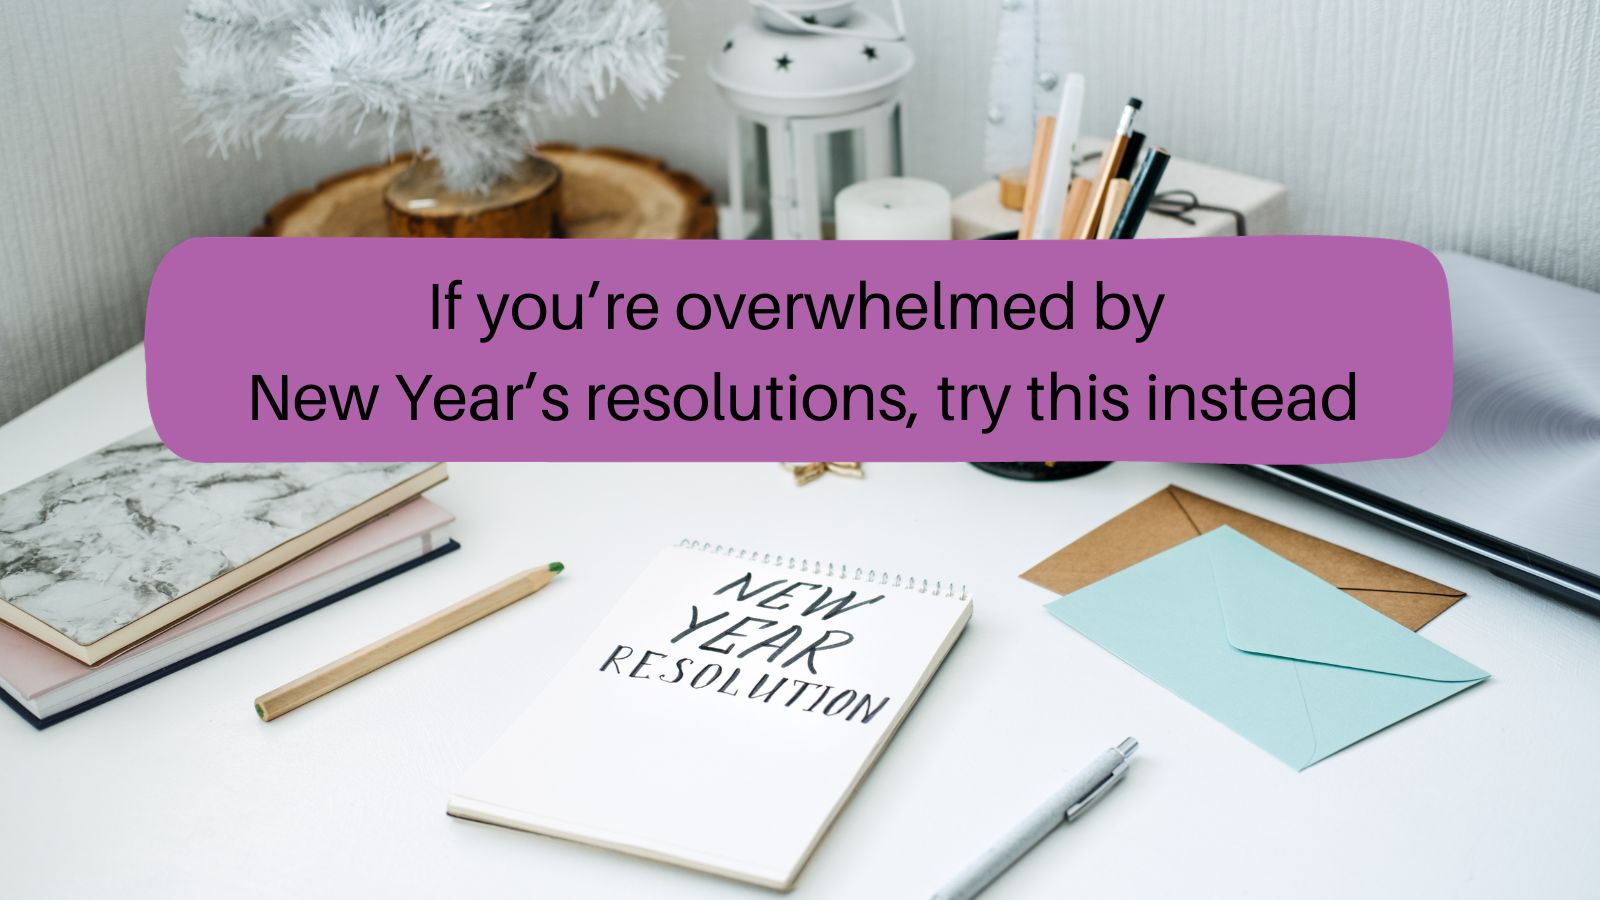 A pad of paper on a desk. The words "New year resolution" are written on the pad of paper. 